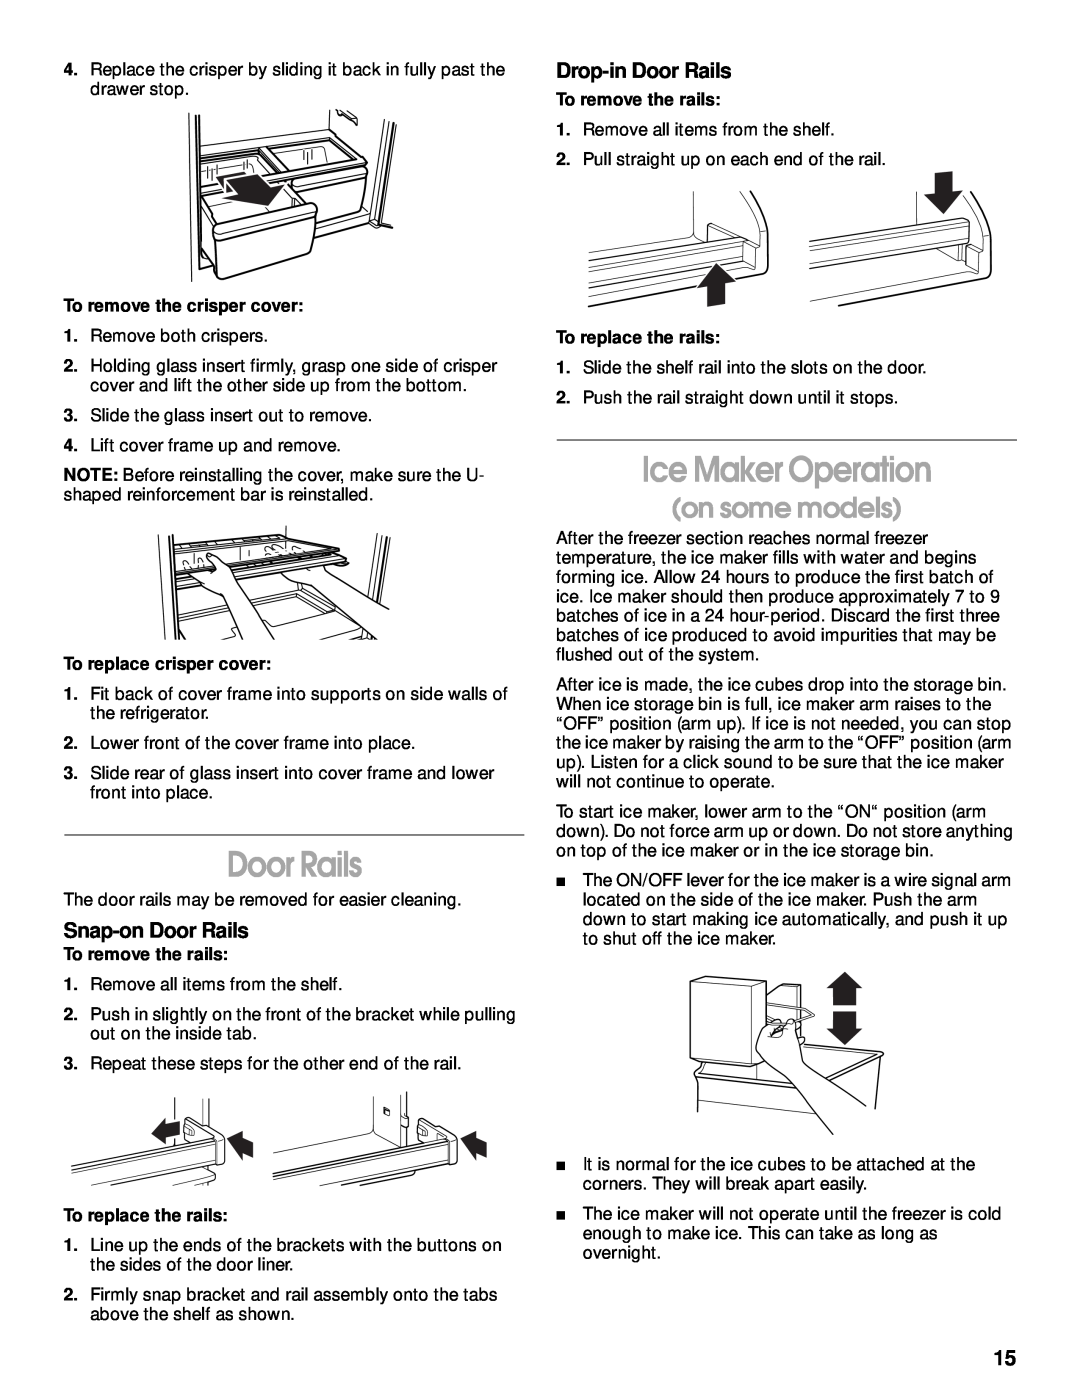 Whirlpool 2199011 Ice Maker Operation, Snap-on Door Rails, Drop-in Door Rails, on some models, To remove the rails 